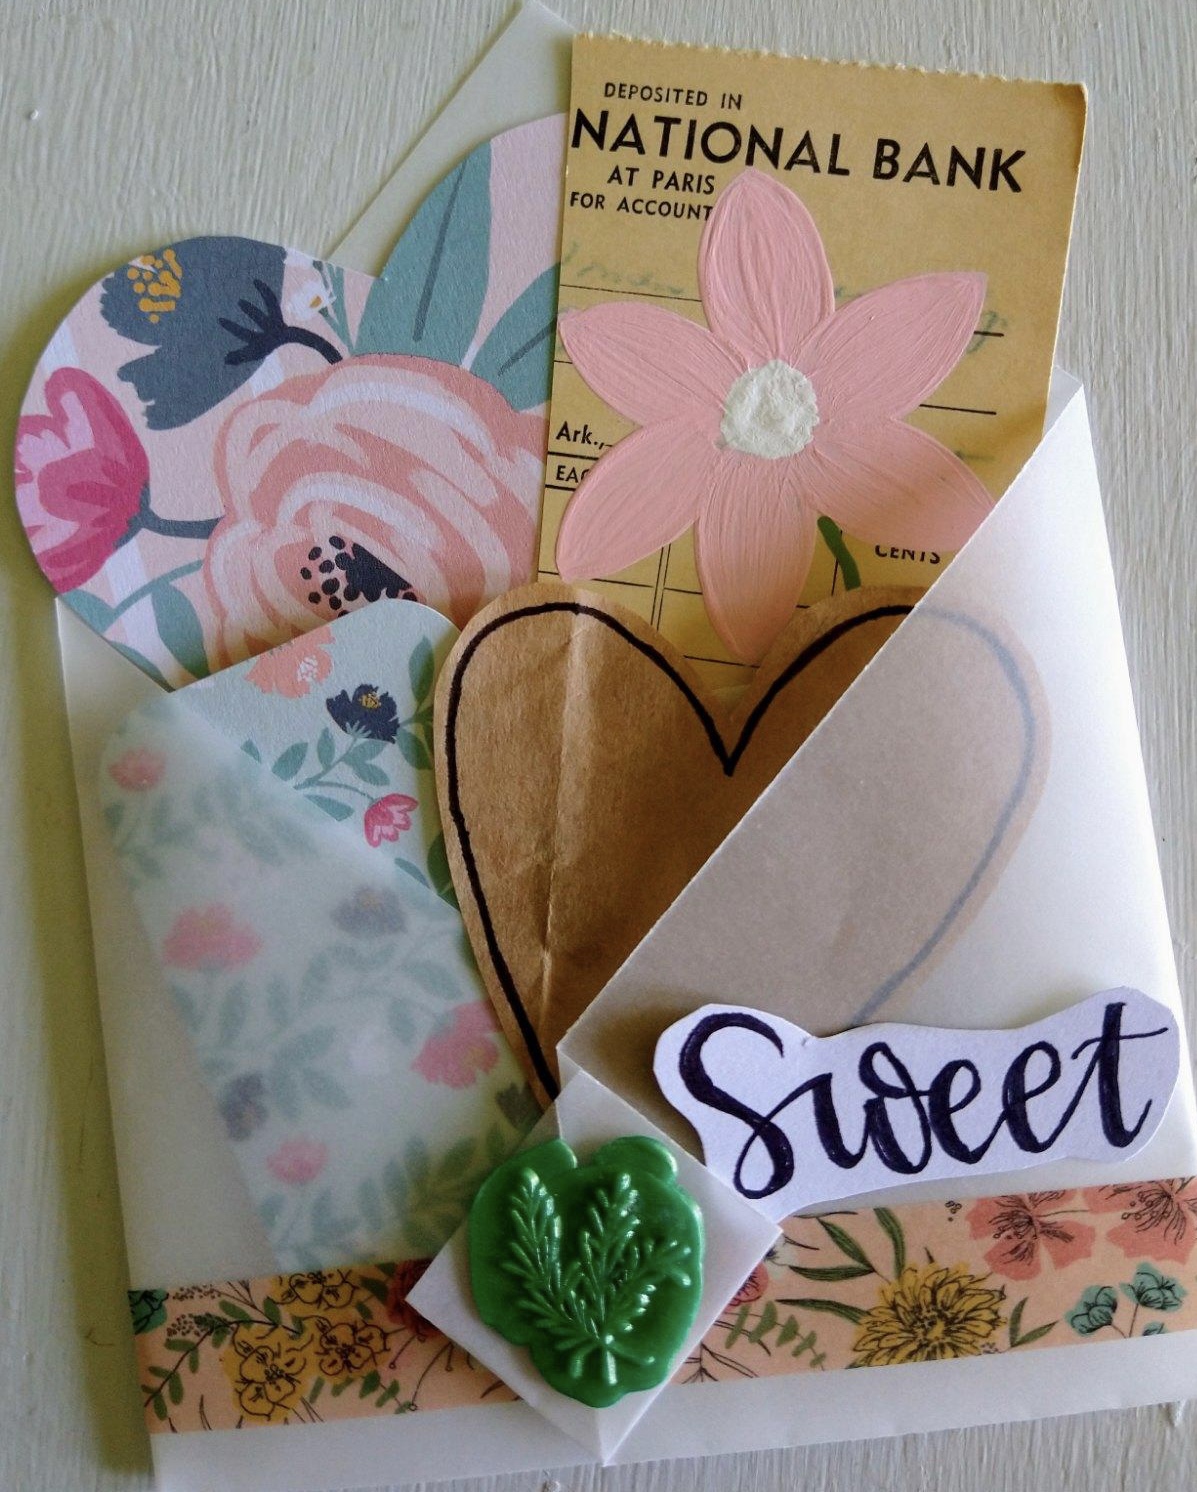 homemade envelope with scrapbook items in it